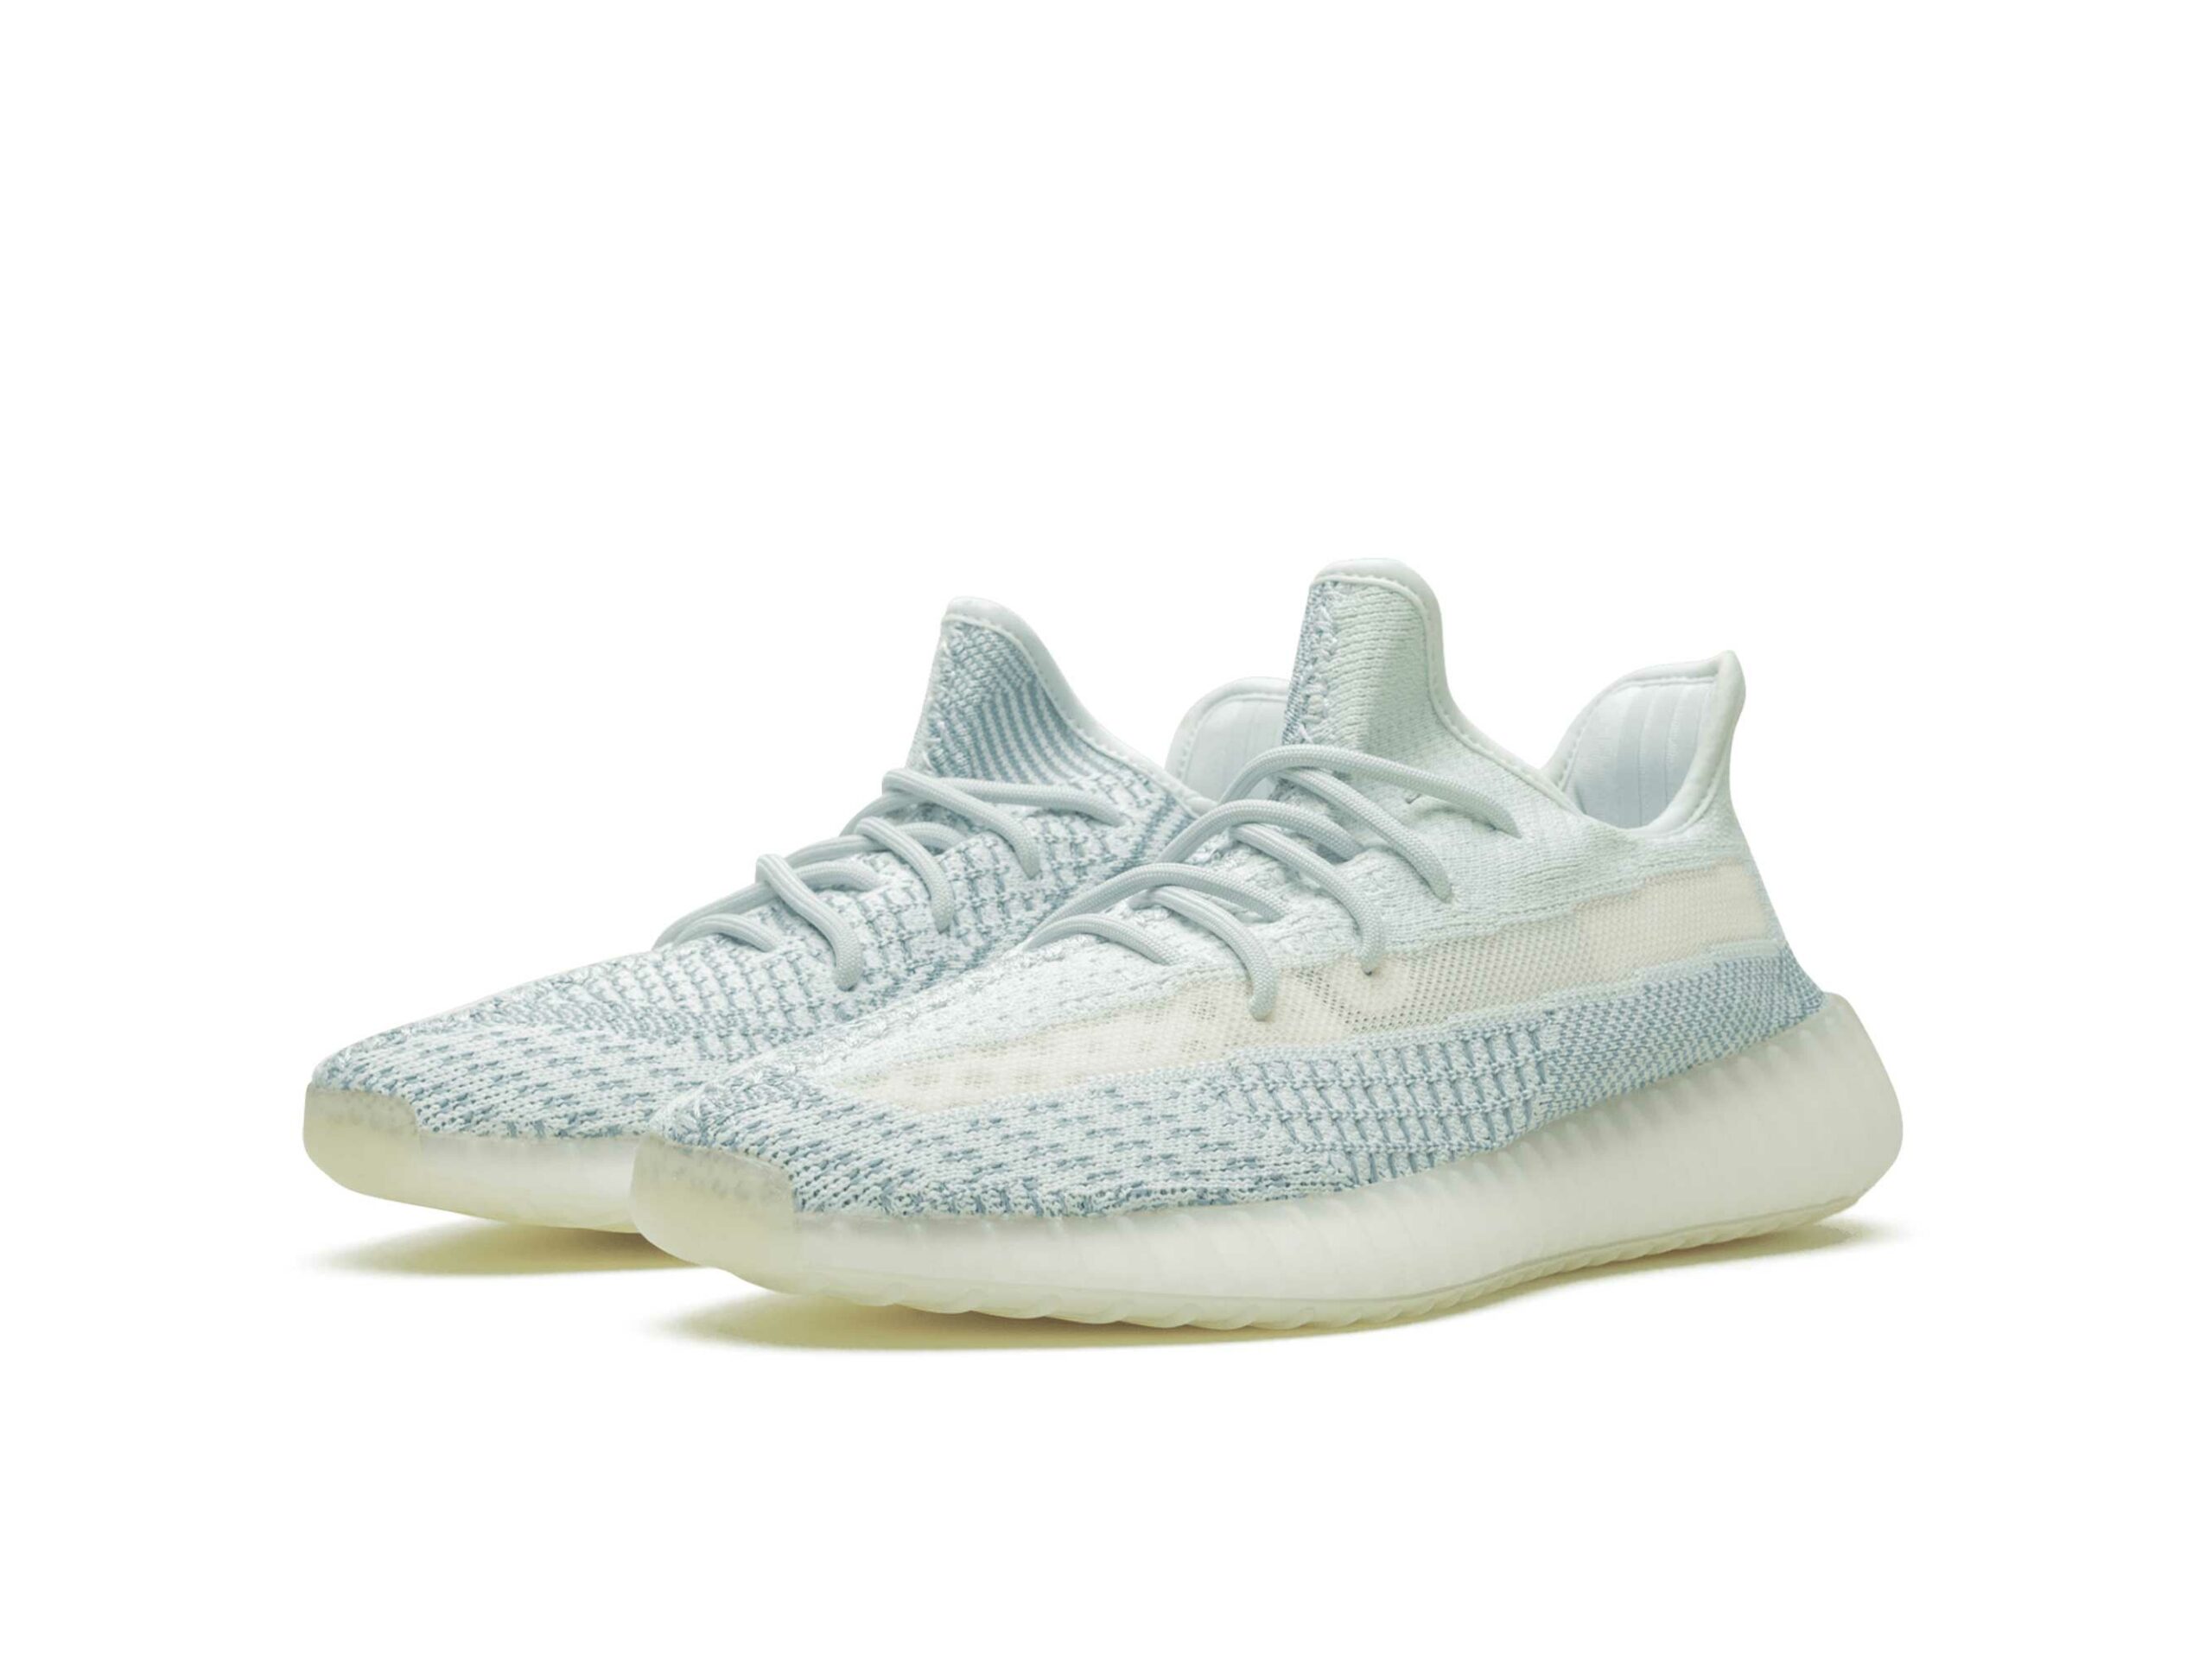 adidas yeezy boost 350 v2 cloud white 